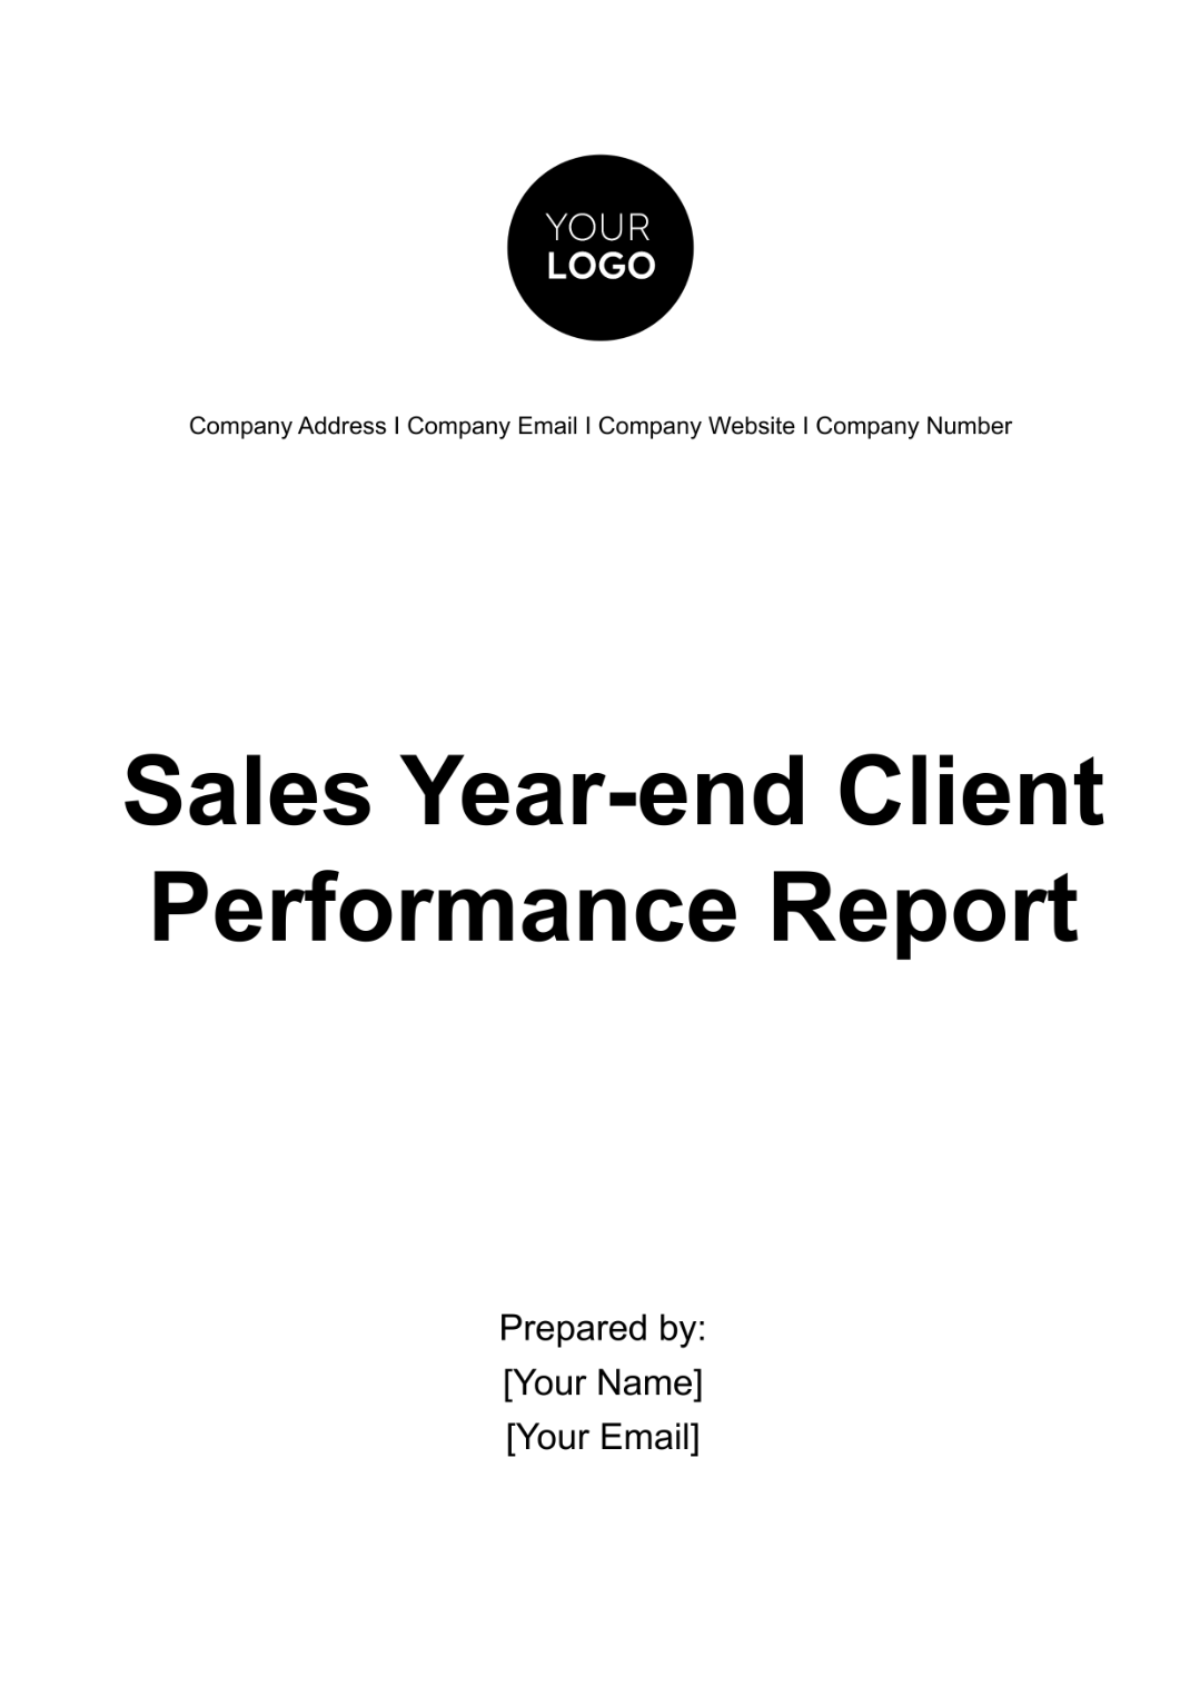 Free Sales Year-end Client Performance Report Template